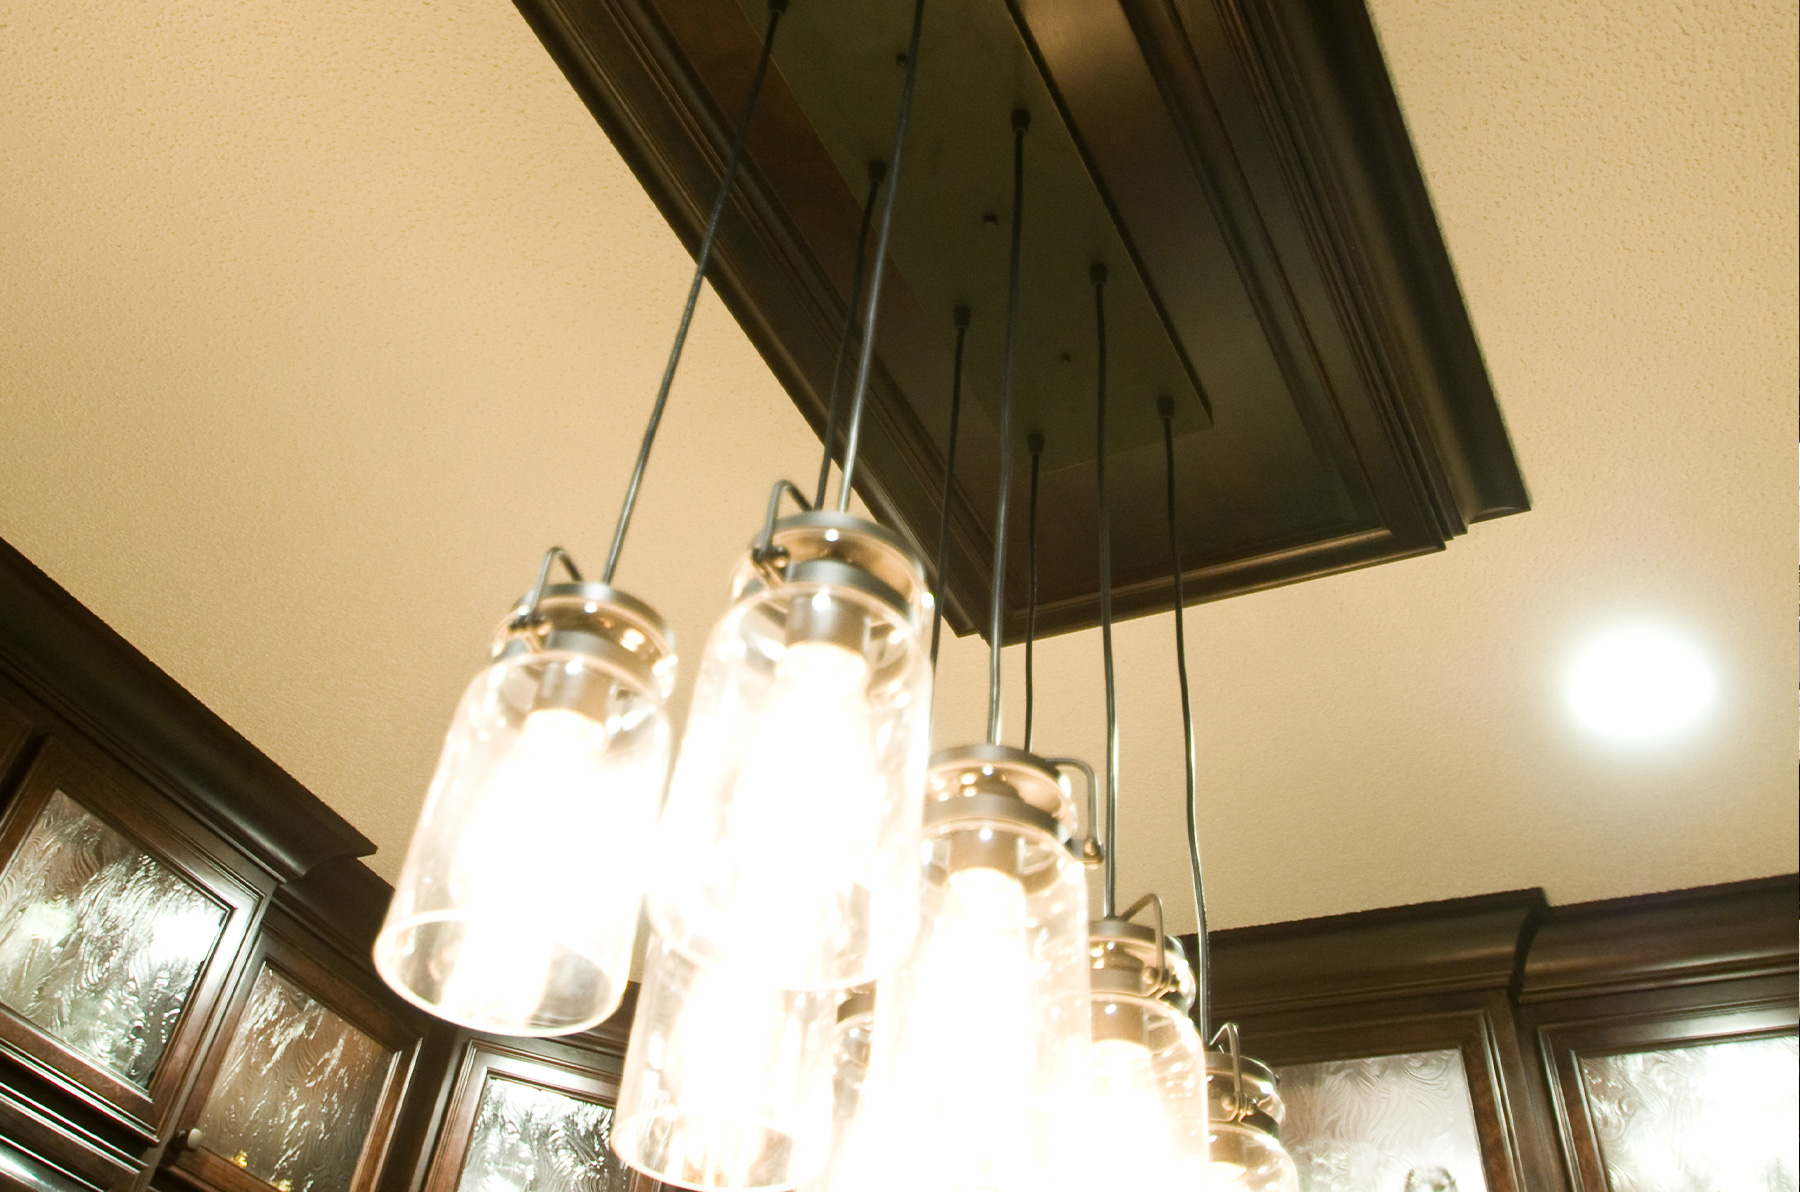 Ceiling lighting by Country Cabinets